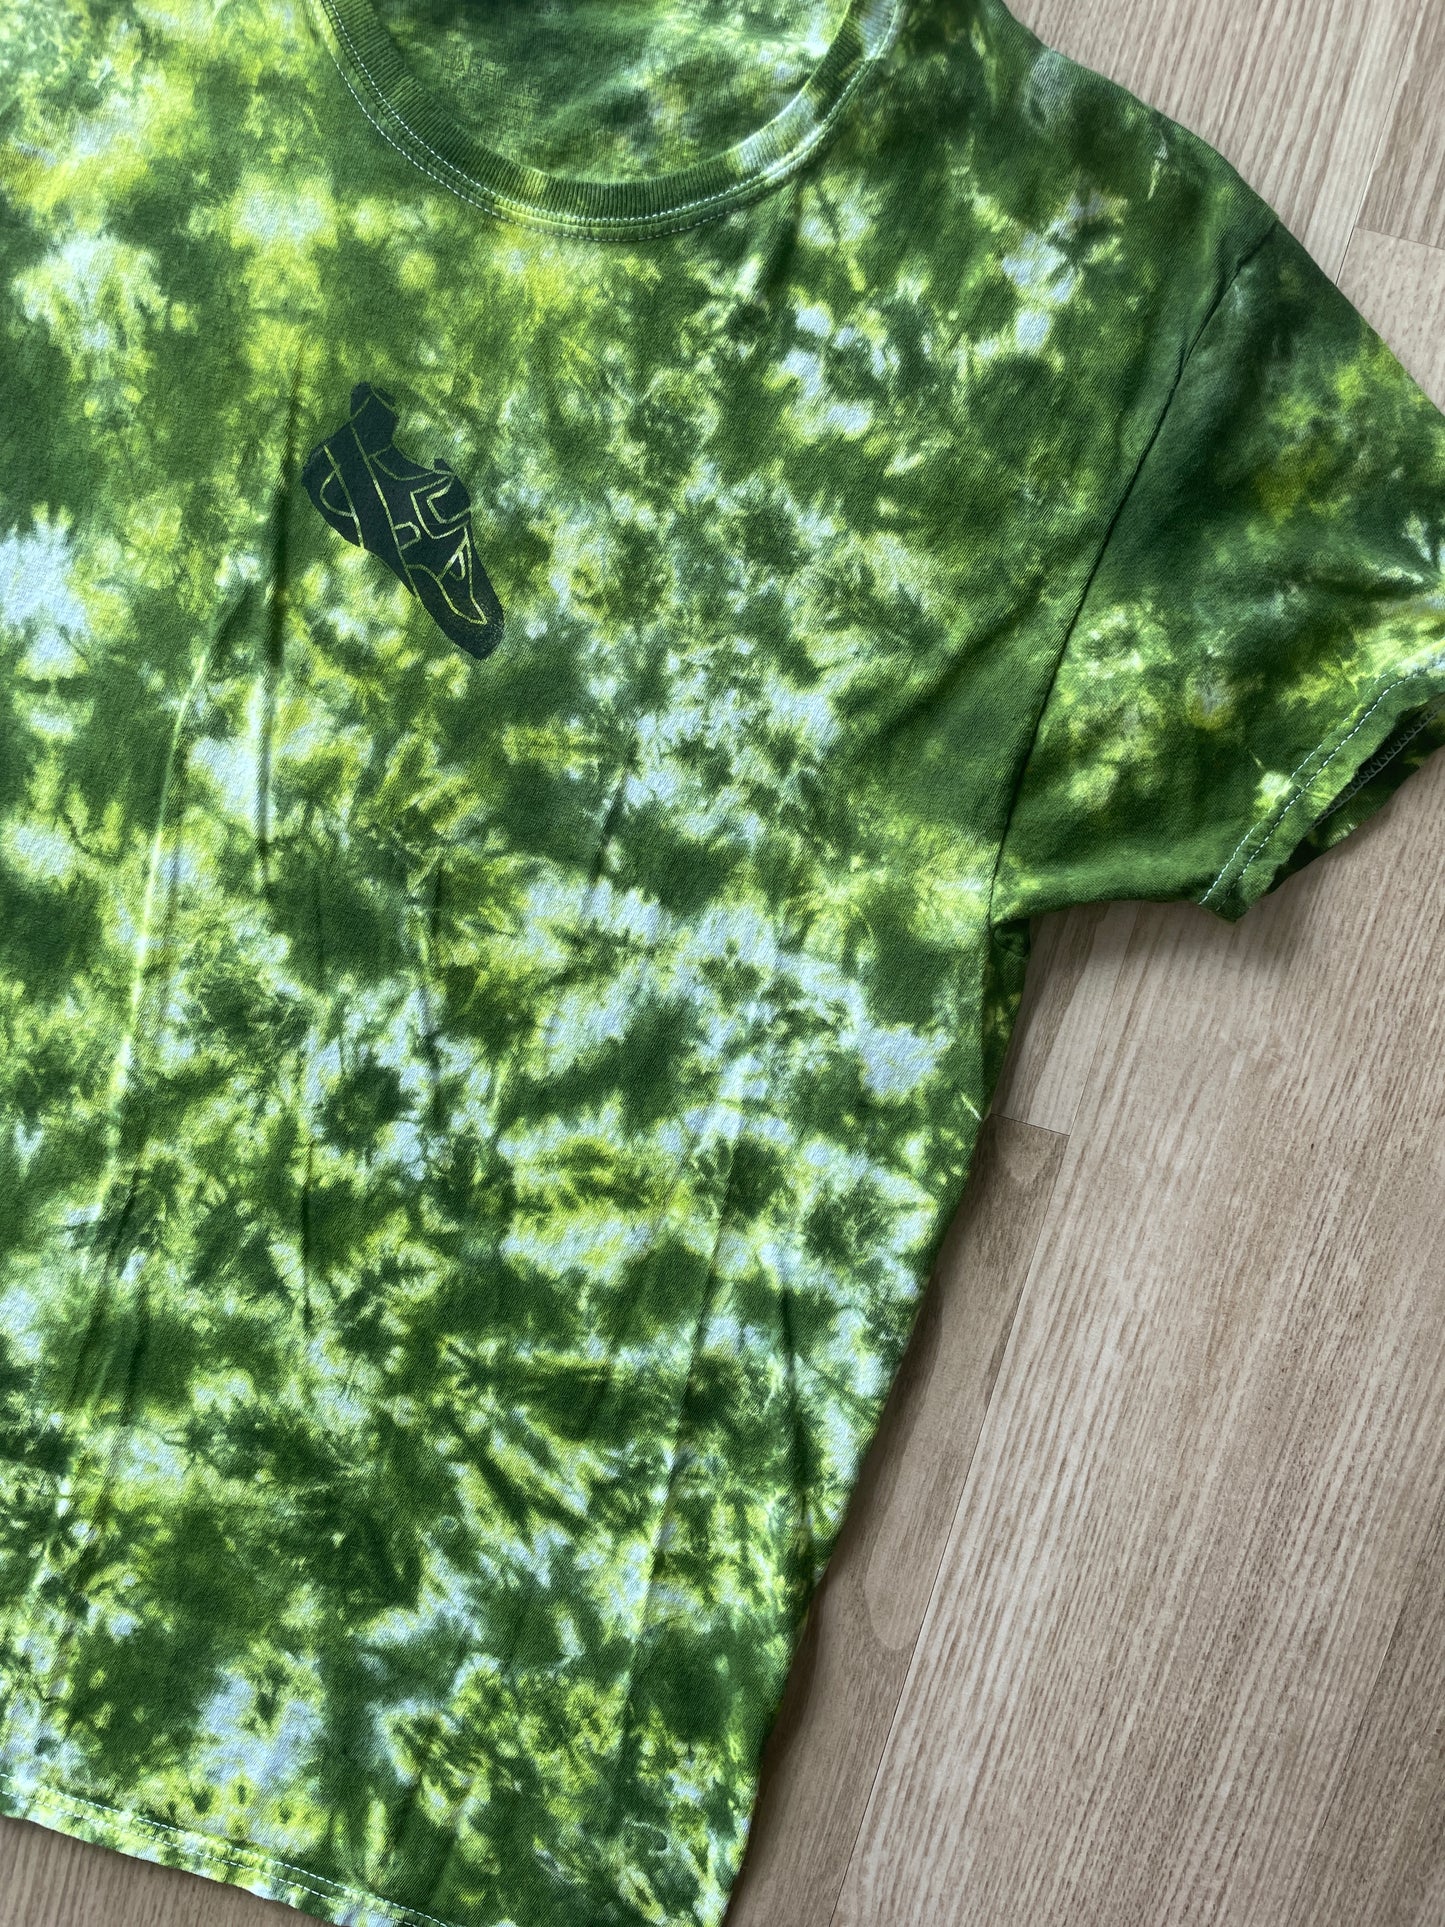 Large Men’s Climbing Shoe Tie Dye T-Shirt | One-Of-a-Kind Green and White Crumpled Short Sleeve